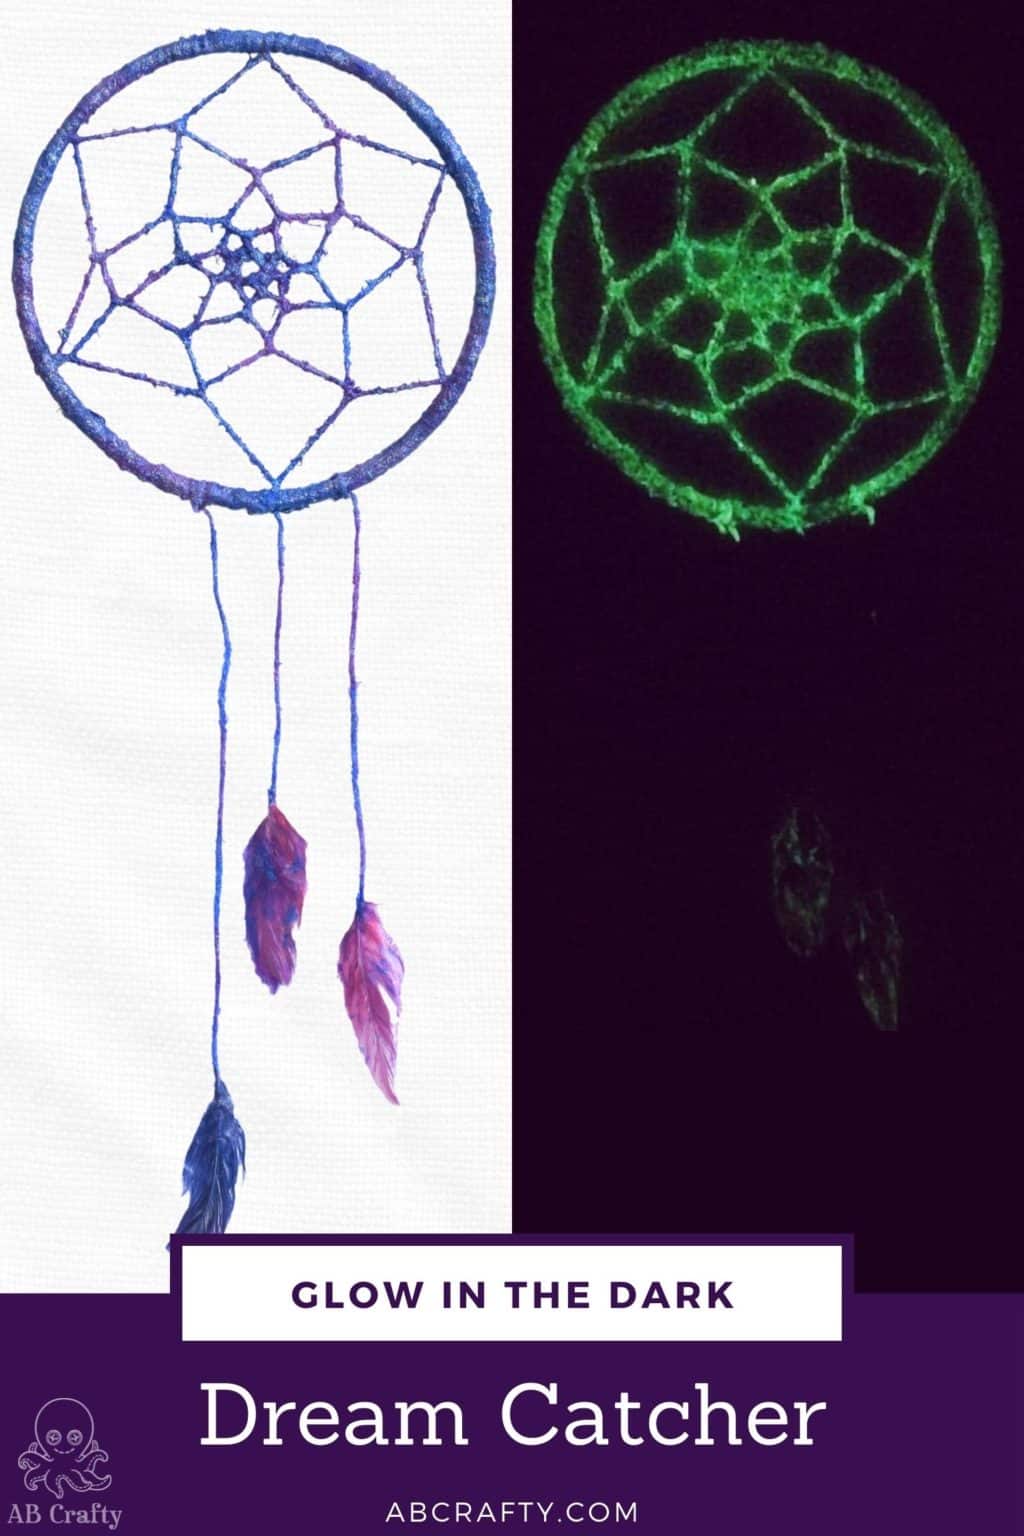 first image is the galaxy dream catcher during the day and the second is the glow in the dark dream catcher glowing green at night. the title reads "glow in the dark dream catcher, abcrafty.com"